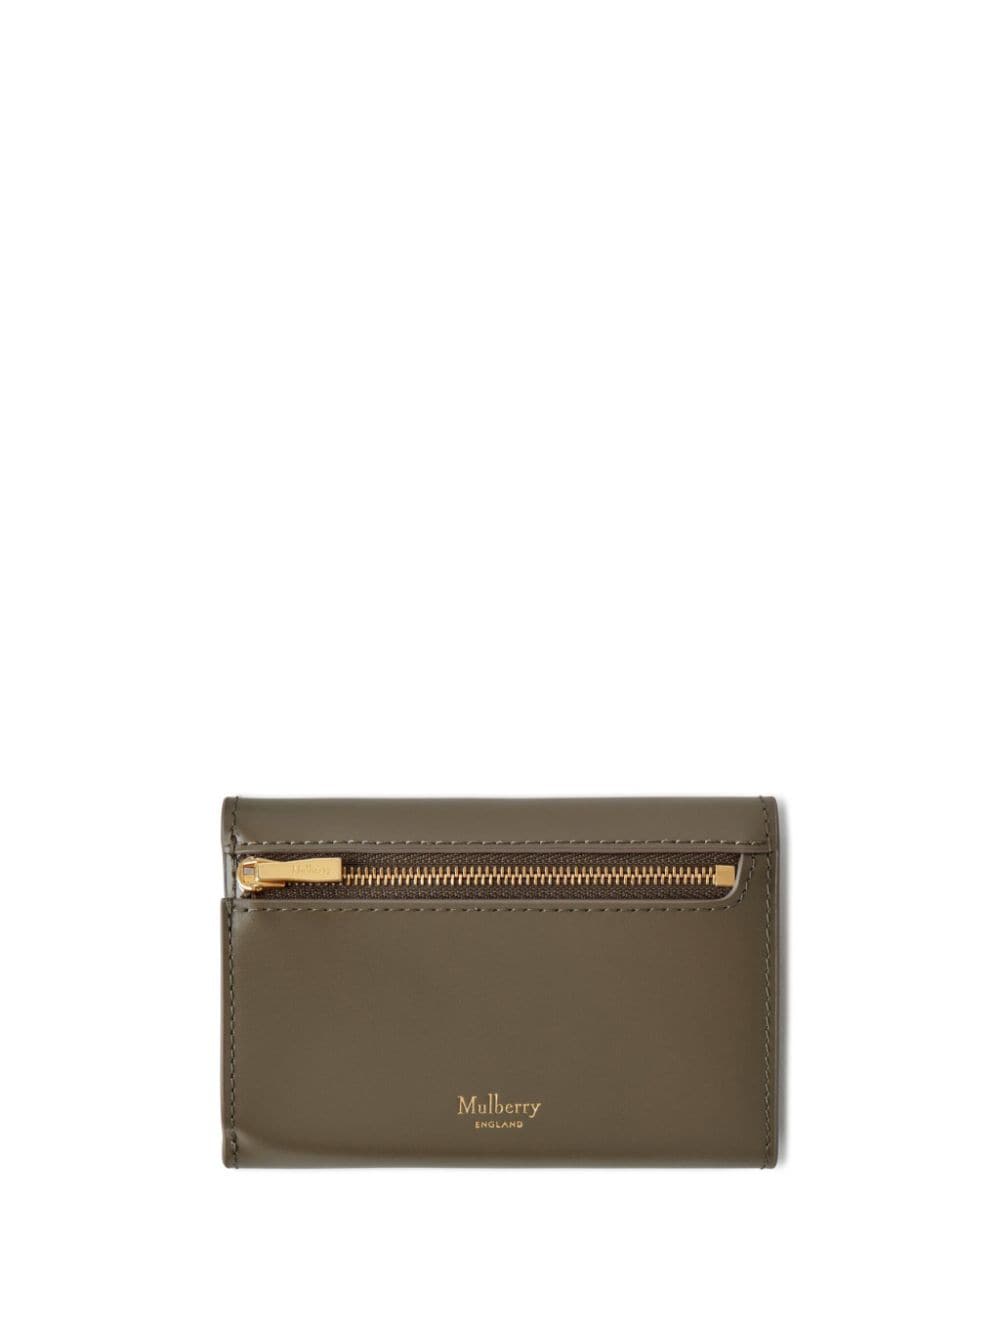 Mulberry Pimlico leather coin pouch - Groen